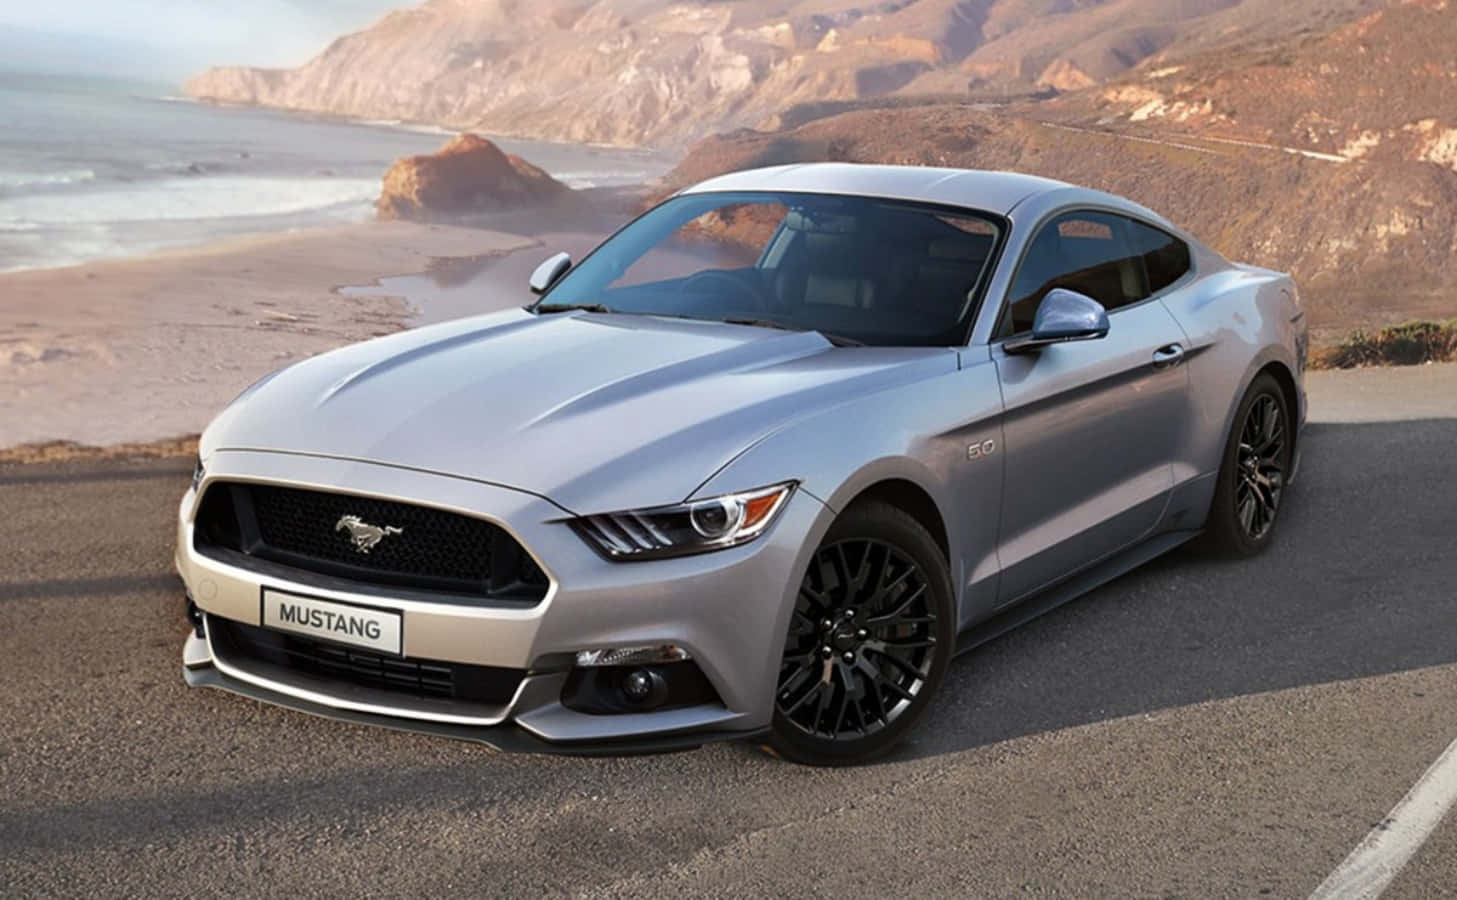 Mustang Muscle Car Gives You Front Row Seats to the Ultimate Thrill Ride